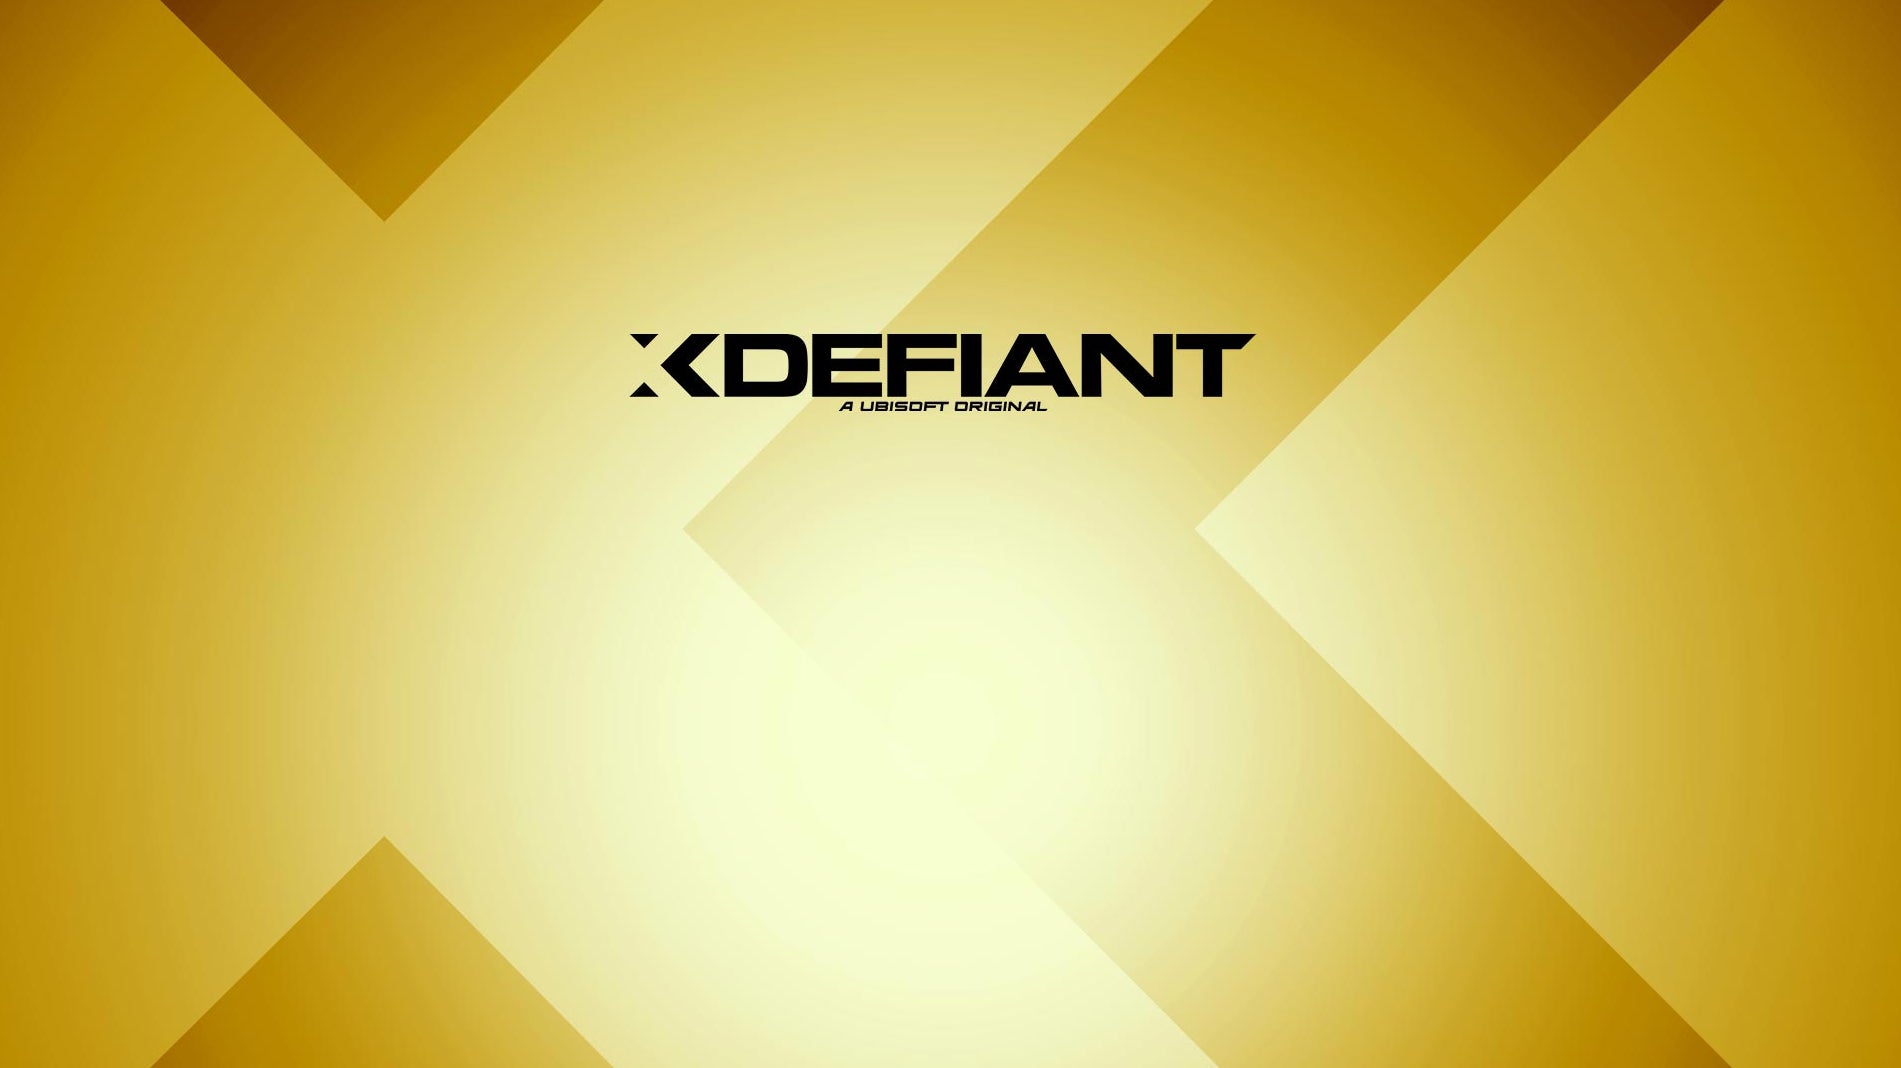 Image for Ubisoft drops Tom Clancy's name from XDefiant